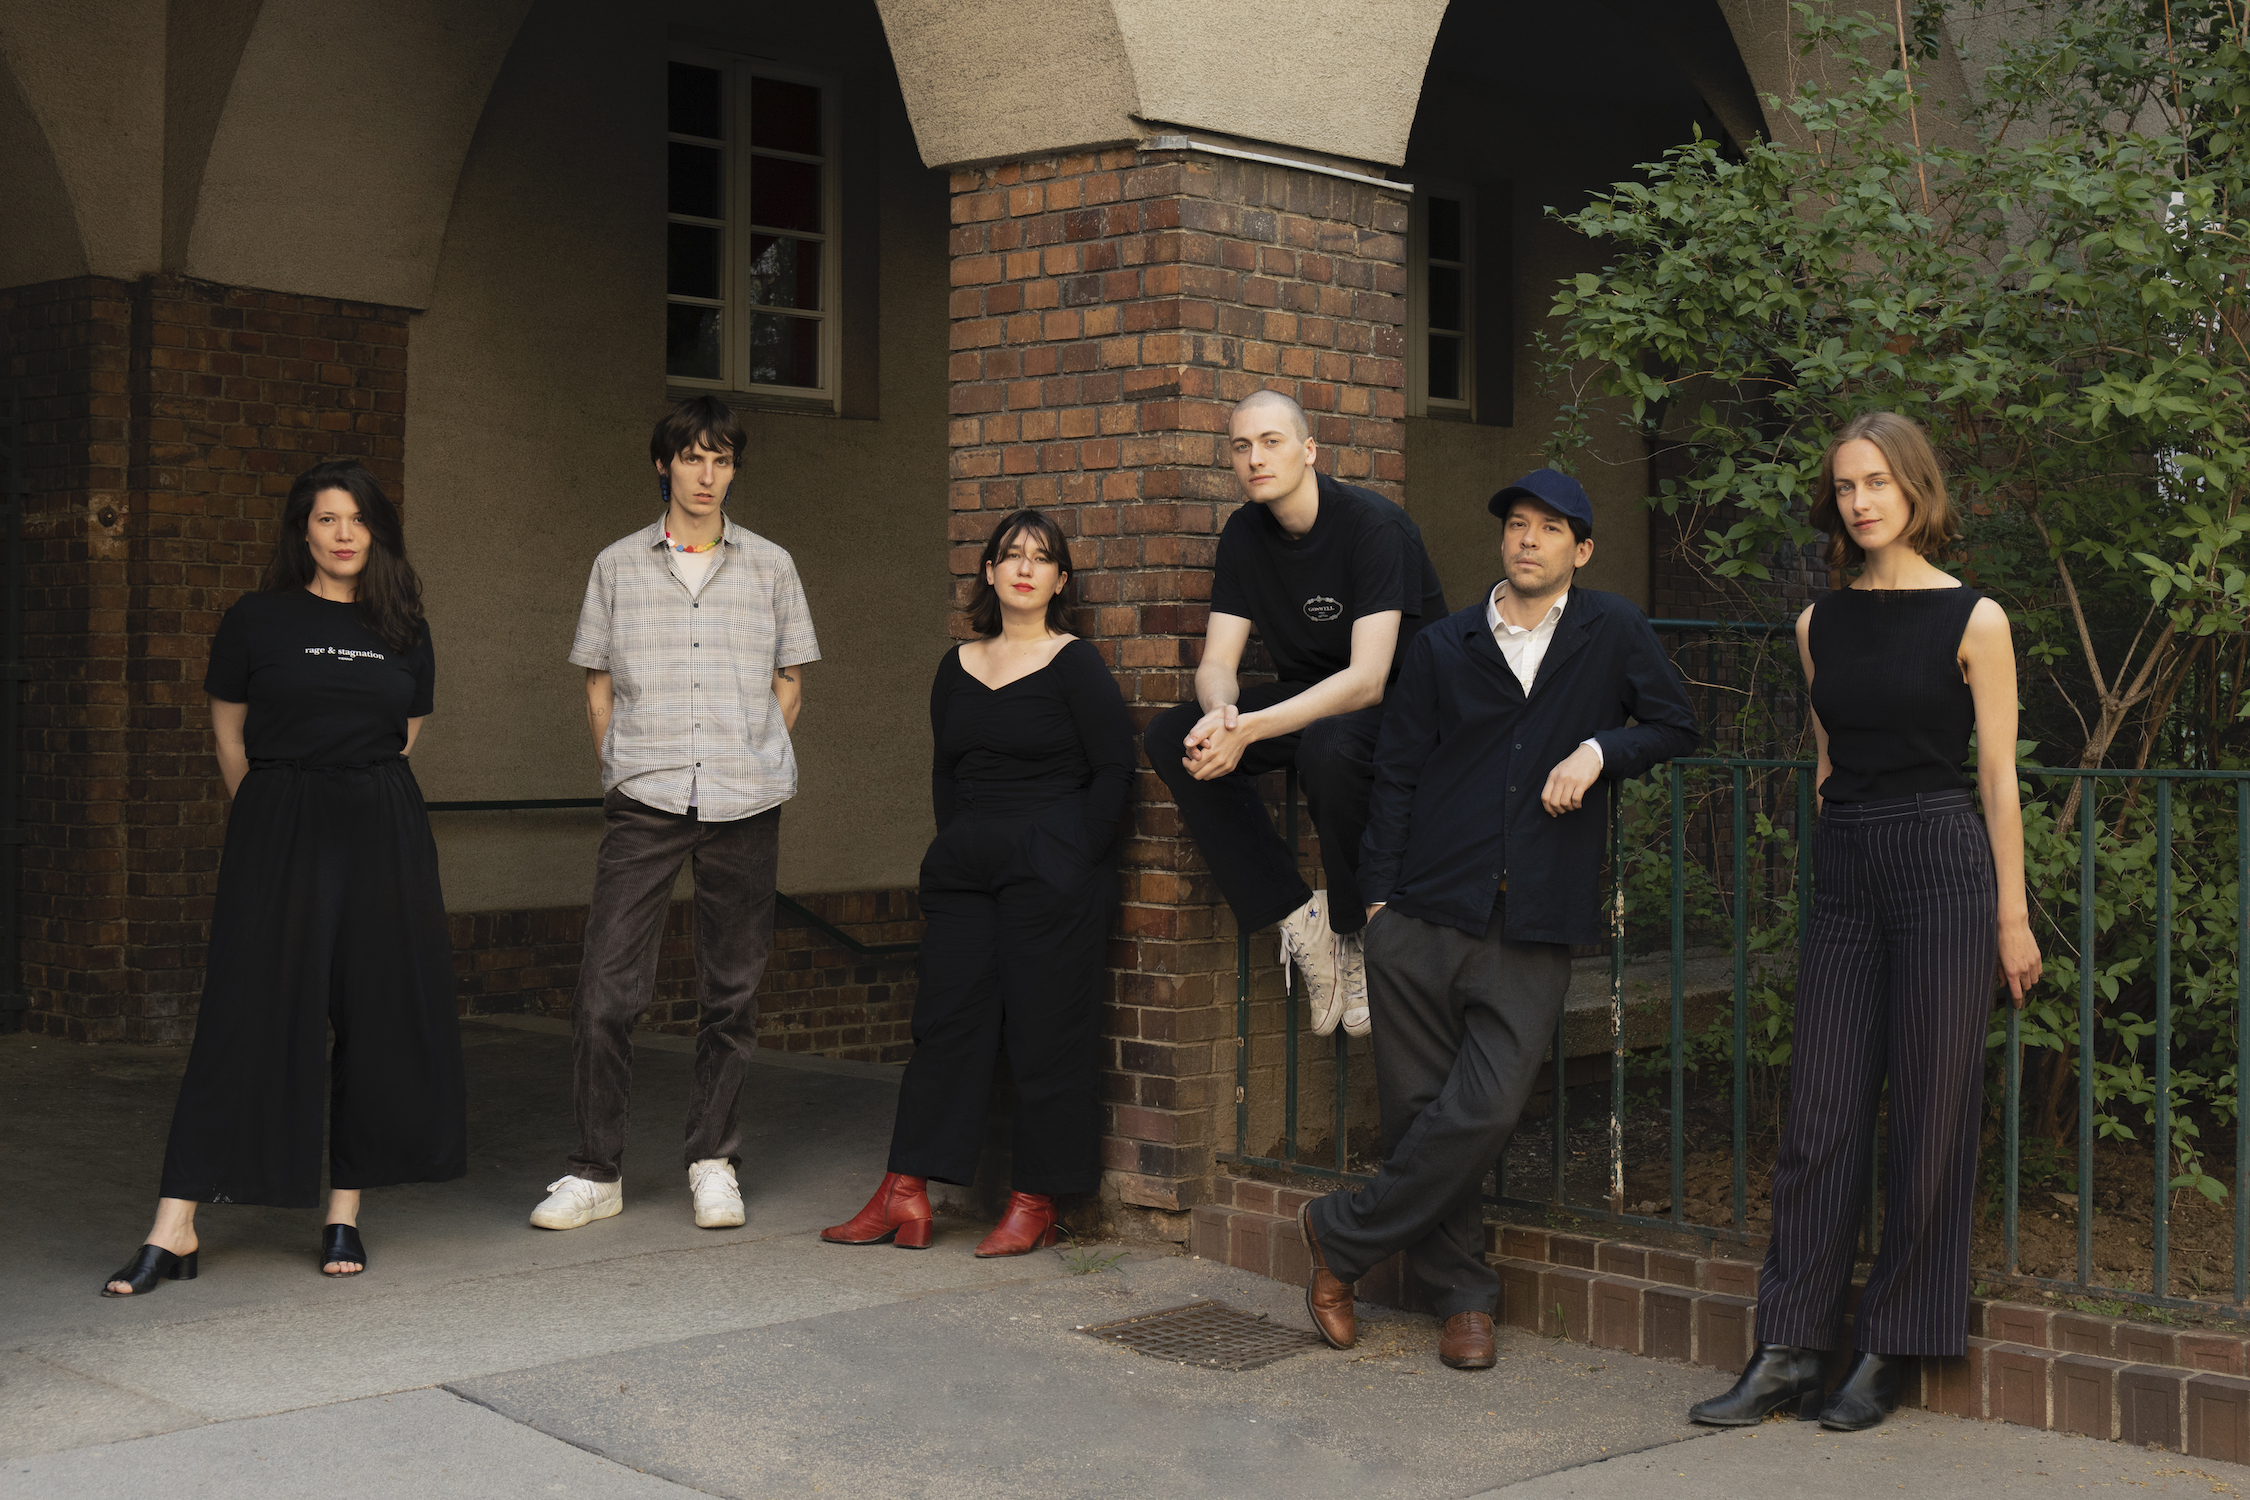 Haus Team: Fanny, Julius, Marie-Claire, Bruno, Edin, and Johanna in front of a brick wall